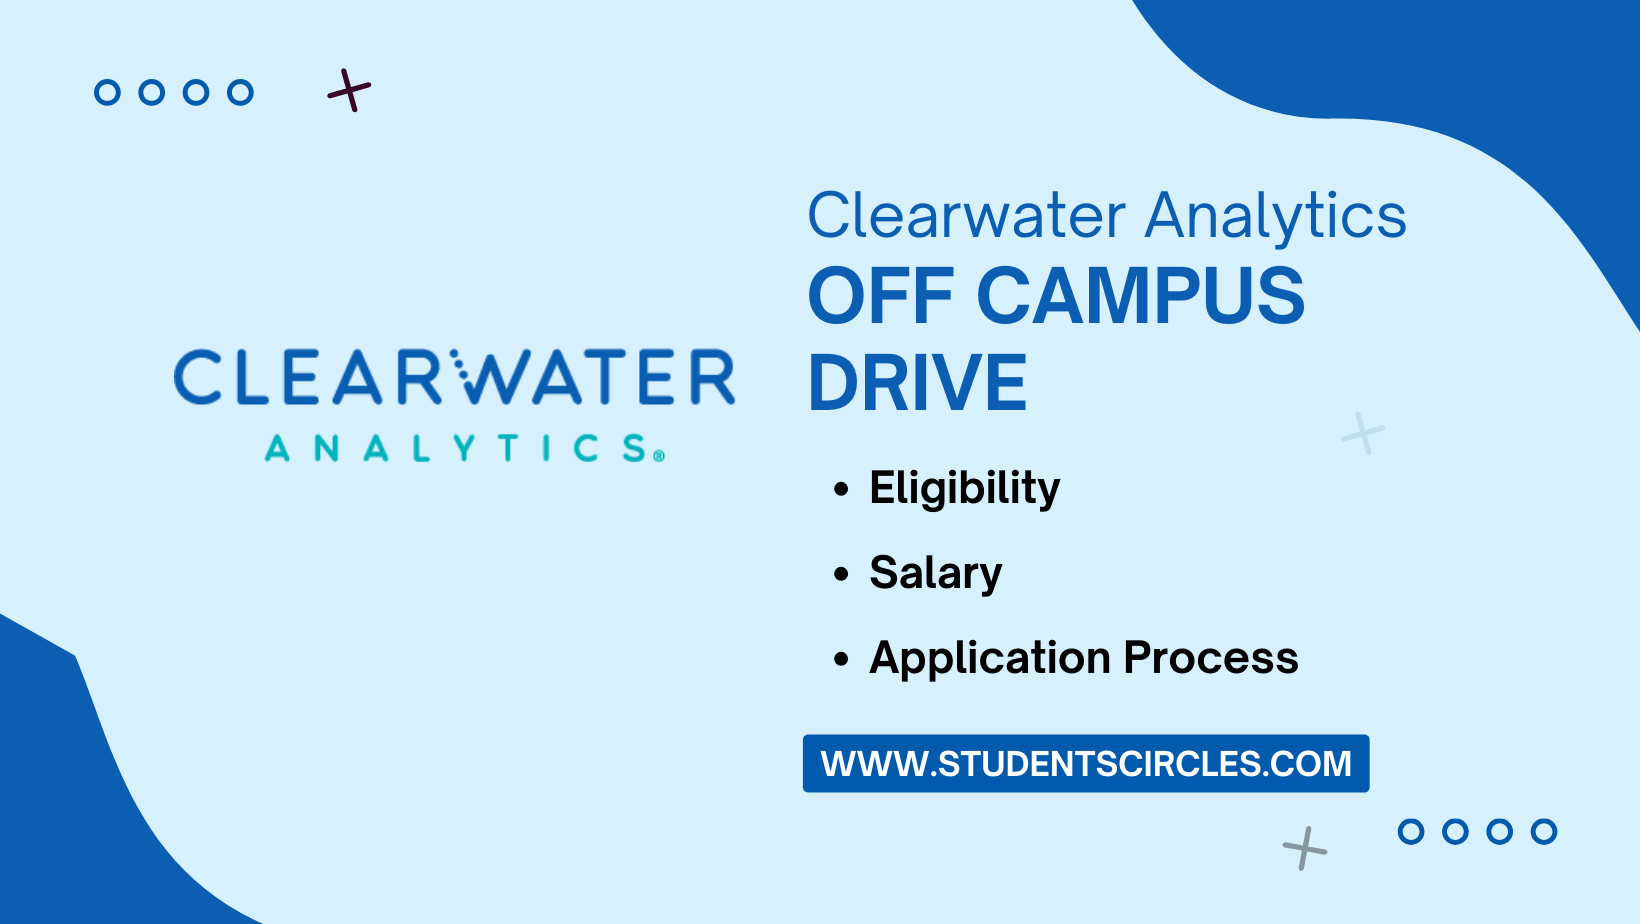 Clearwater Analytics Off Campus Drive